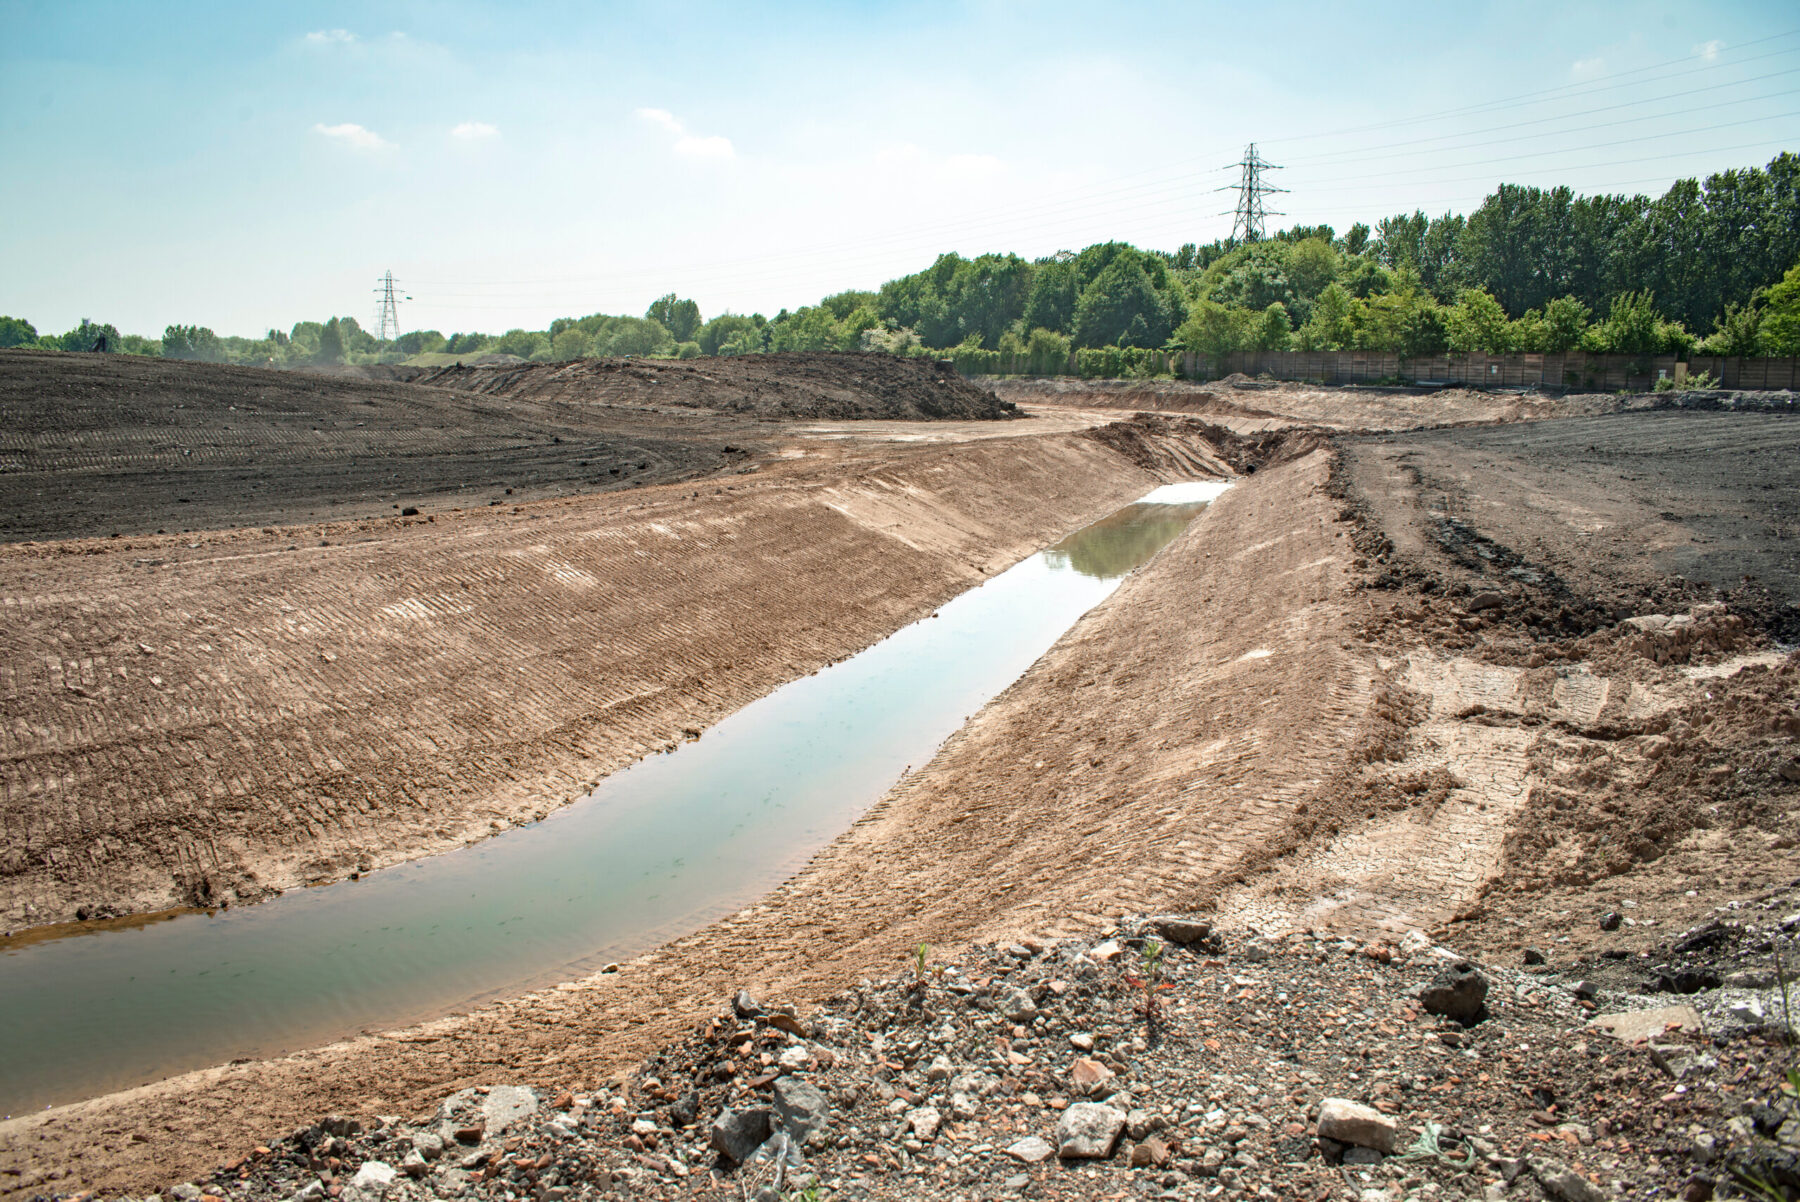 A stream of uncleaned water flows in a remediation site prior to being cleaned